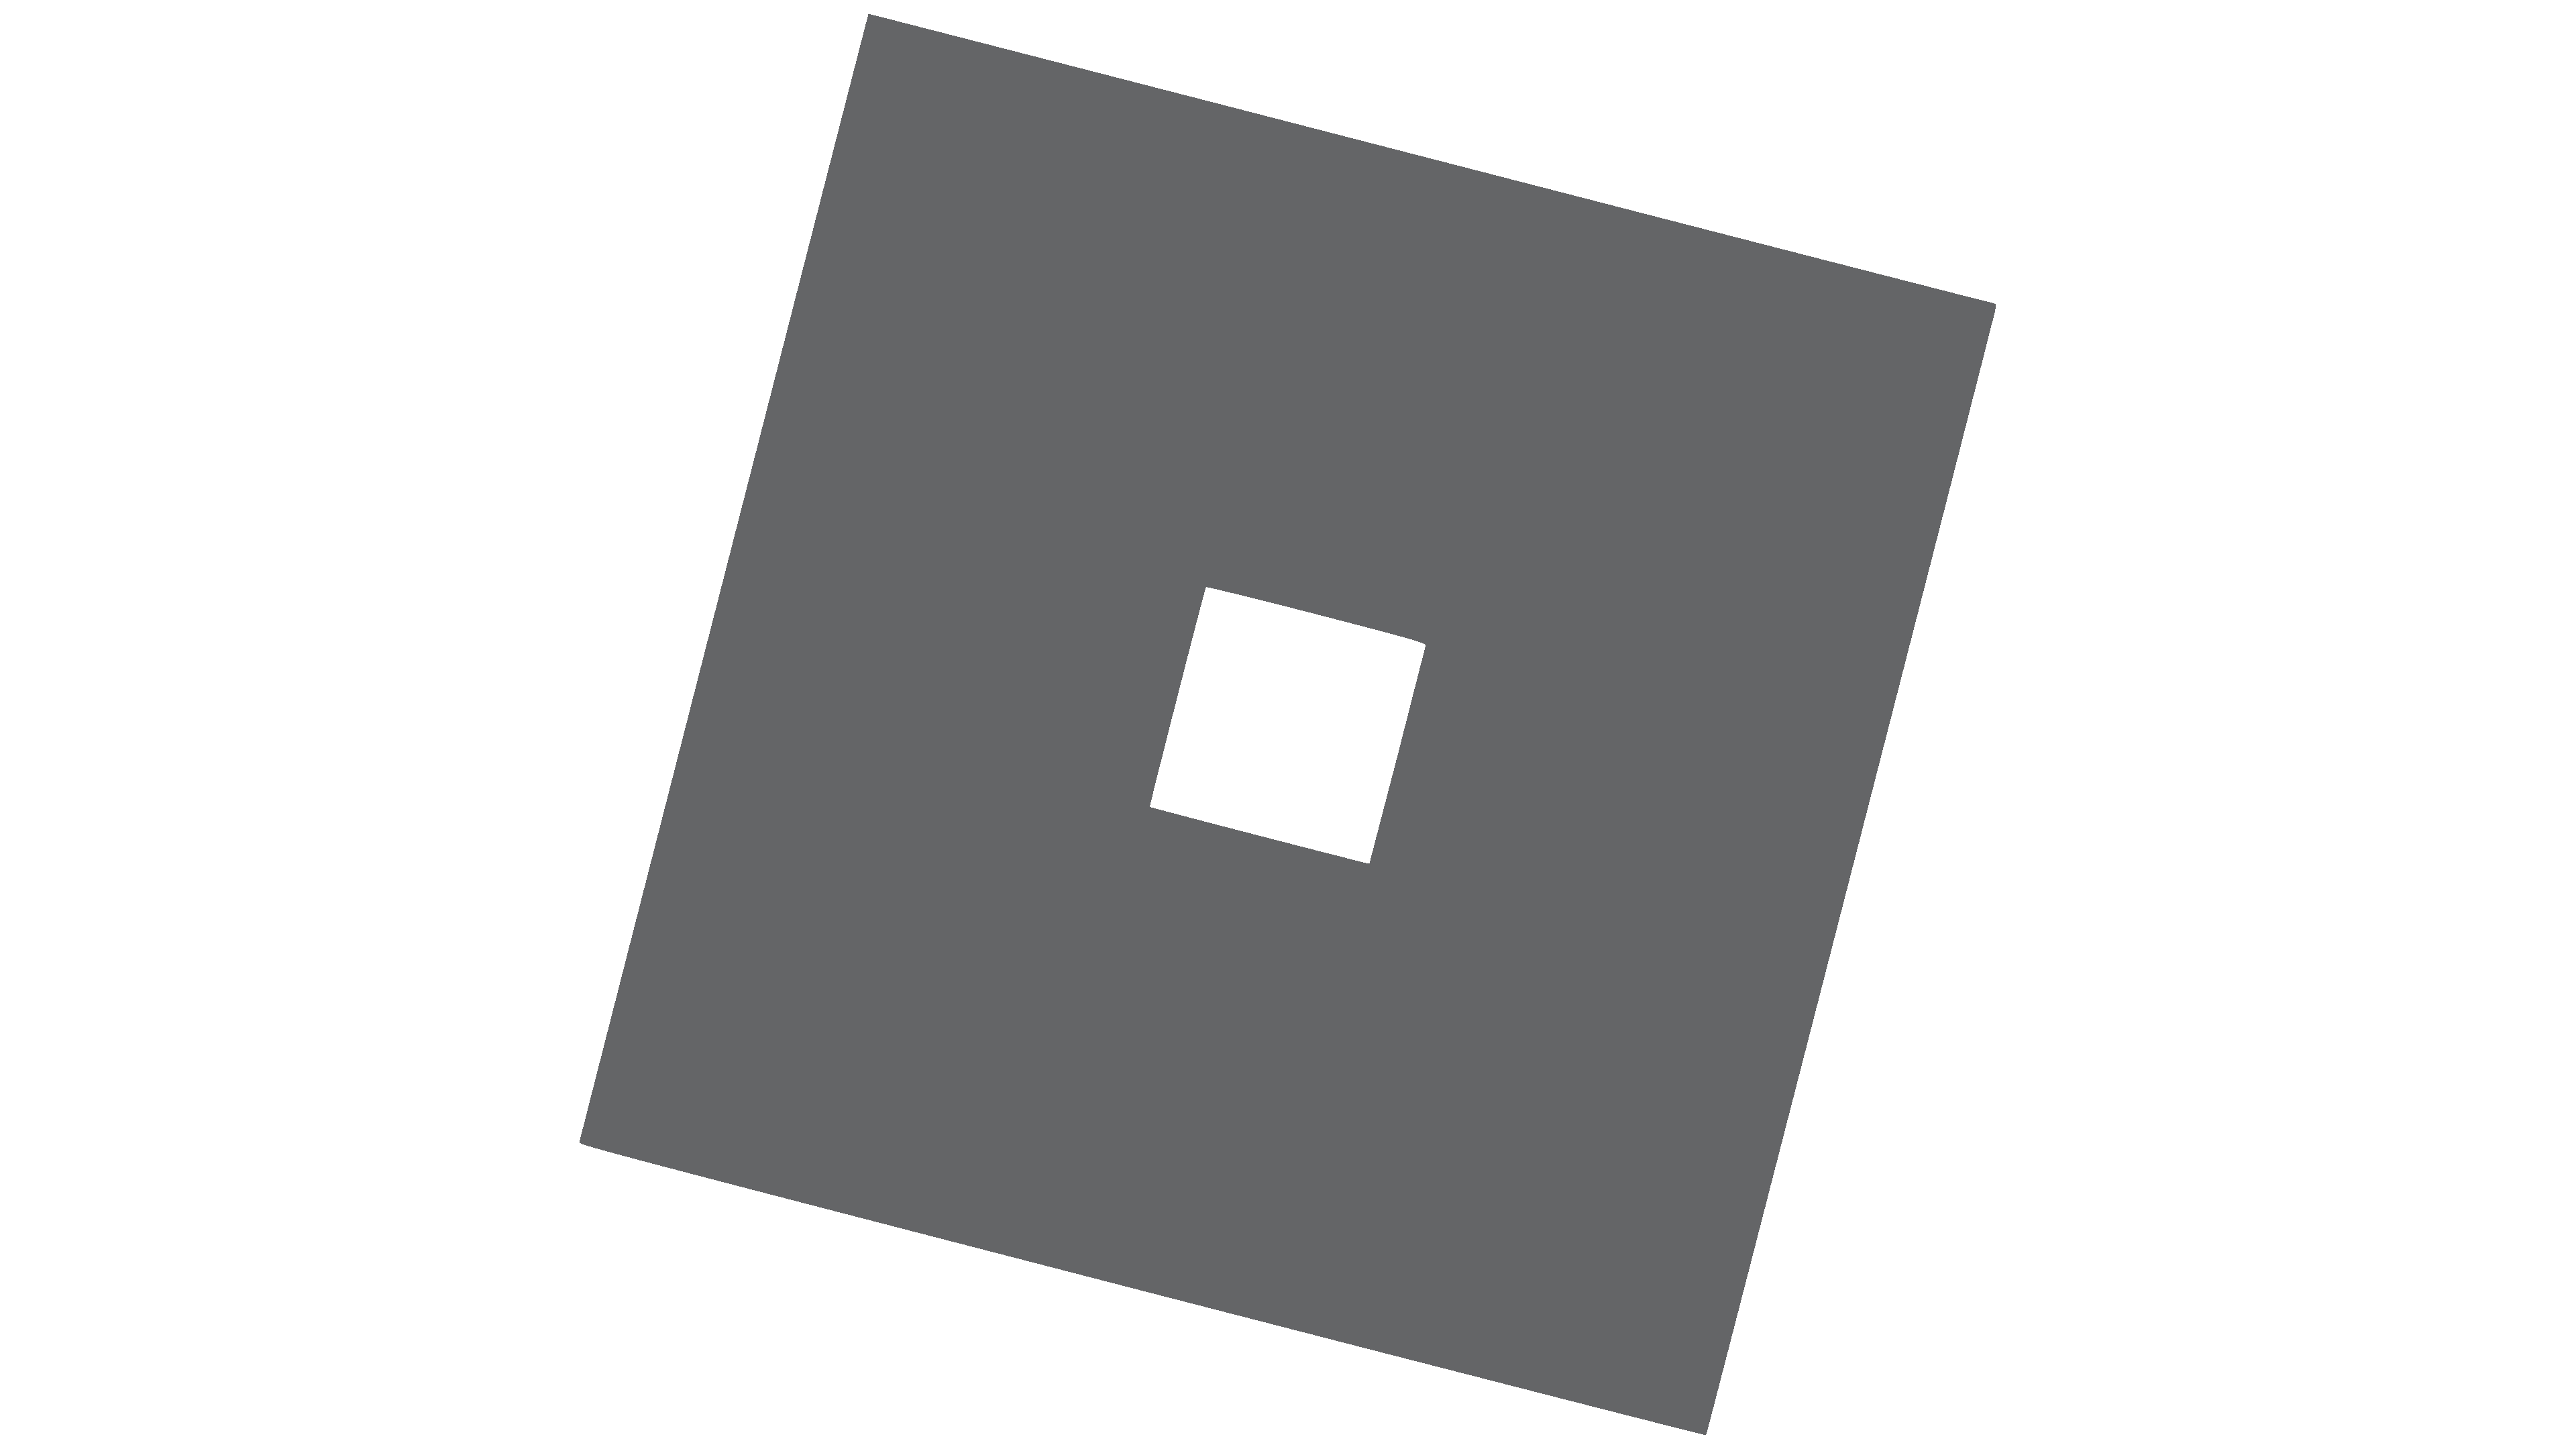 Roblox Logo, meaning, history, PNG, SVG, vector